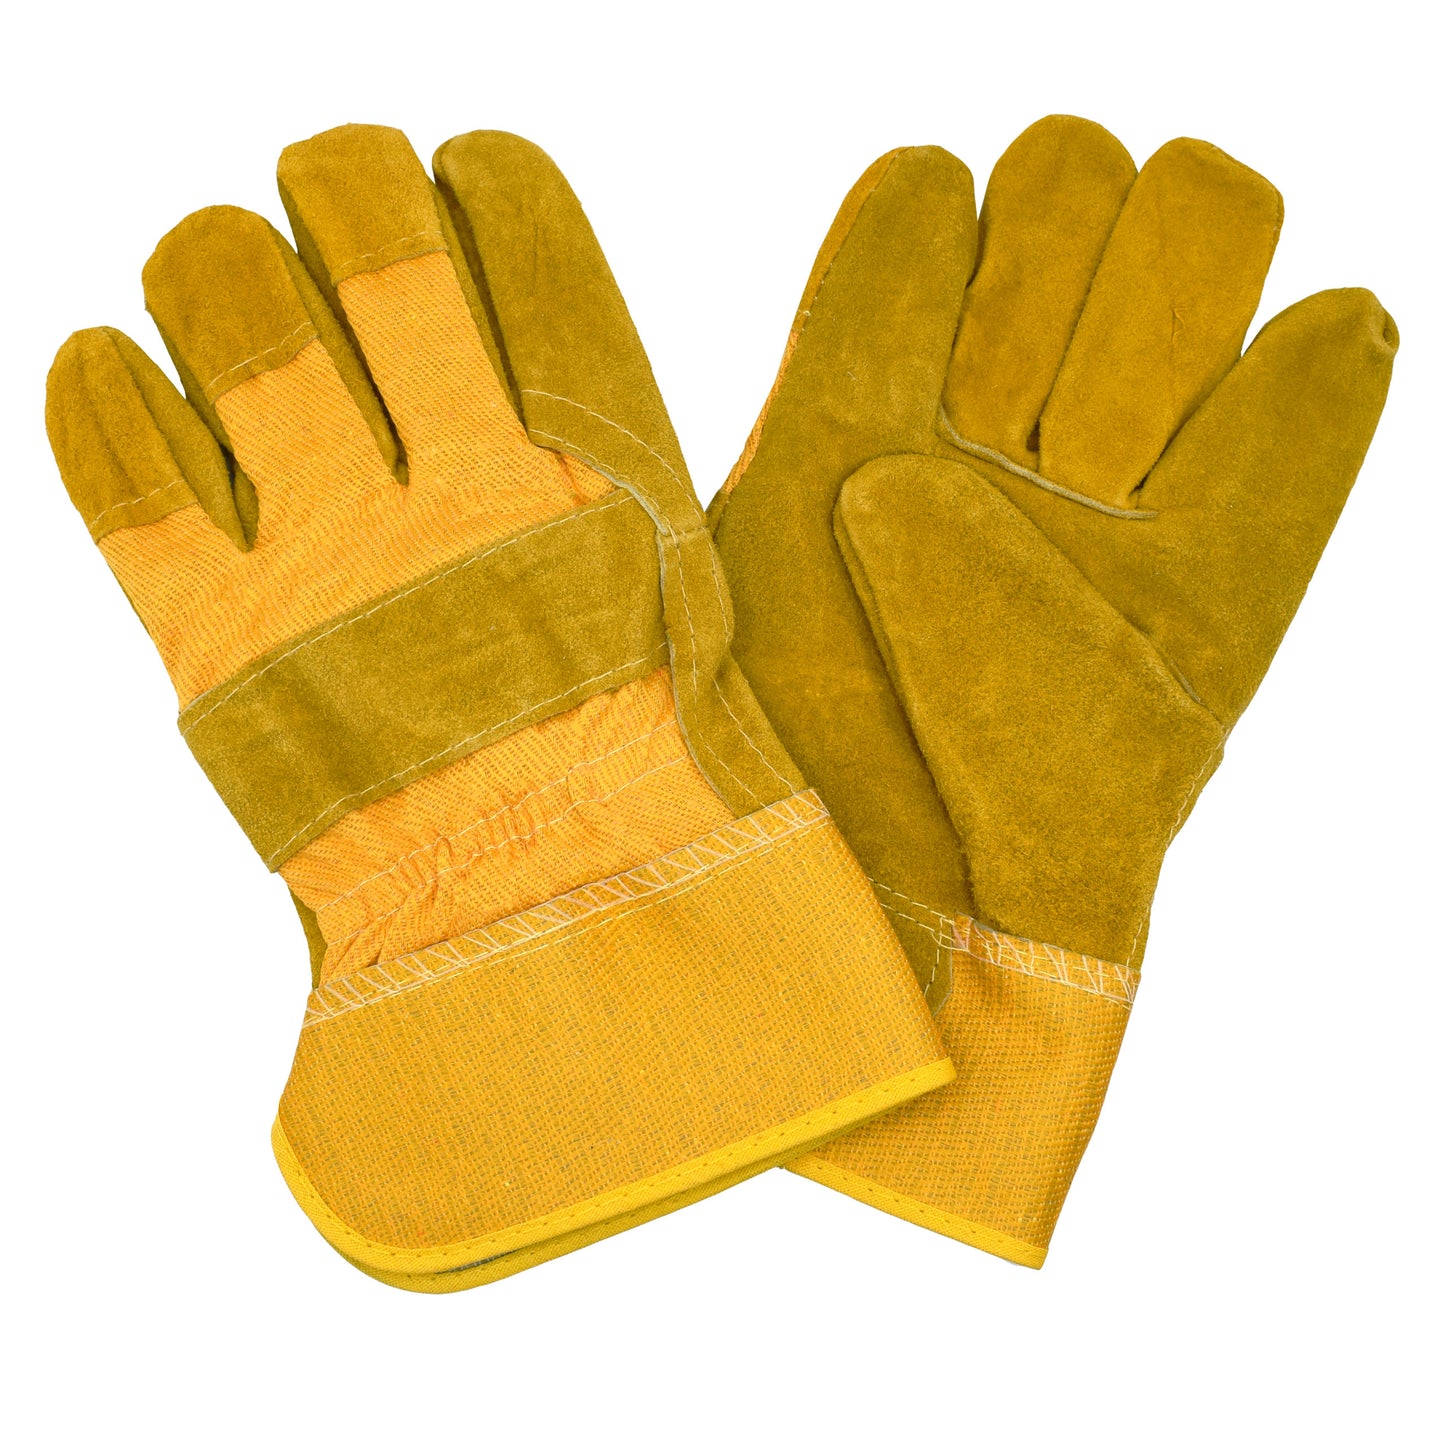 Side Split Leather Palm Gloves, Yellow, Large, Bulk 12-Pack